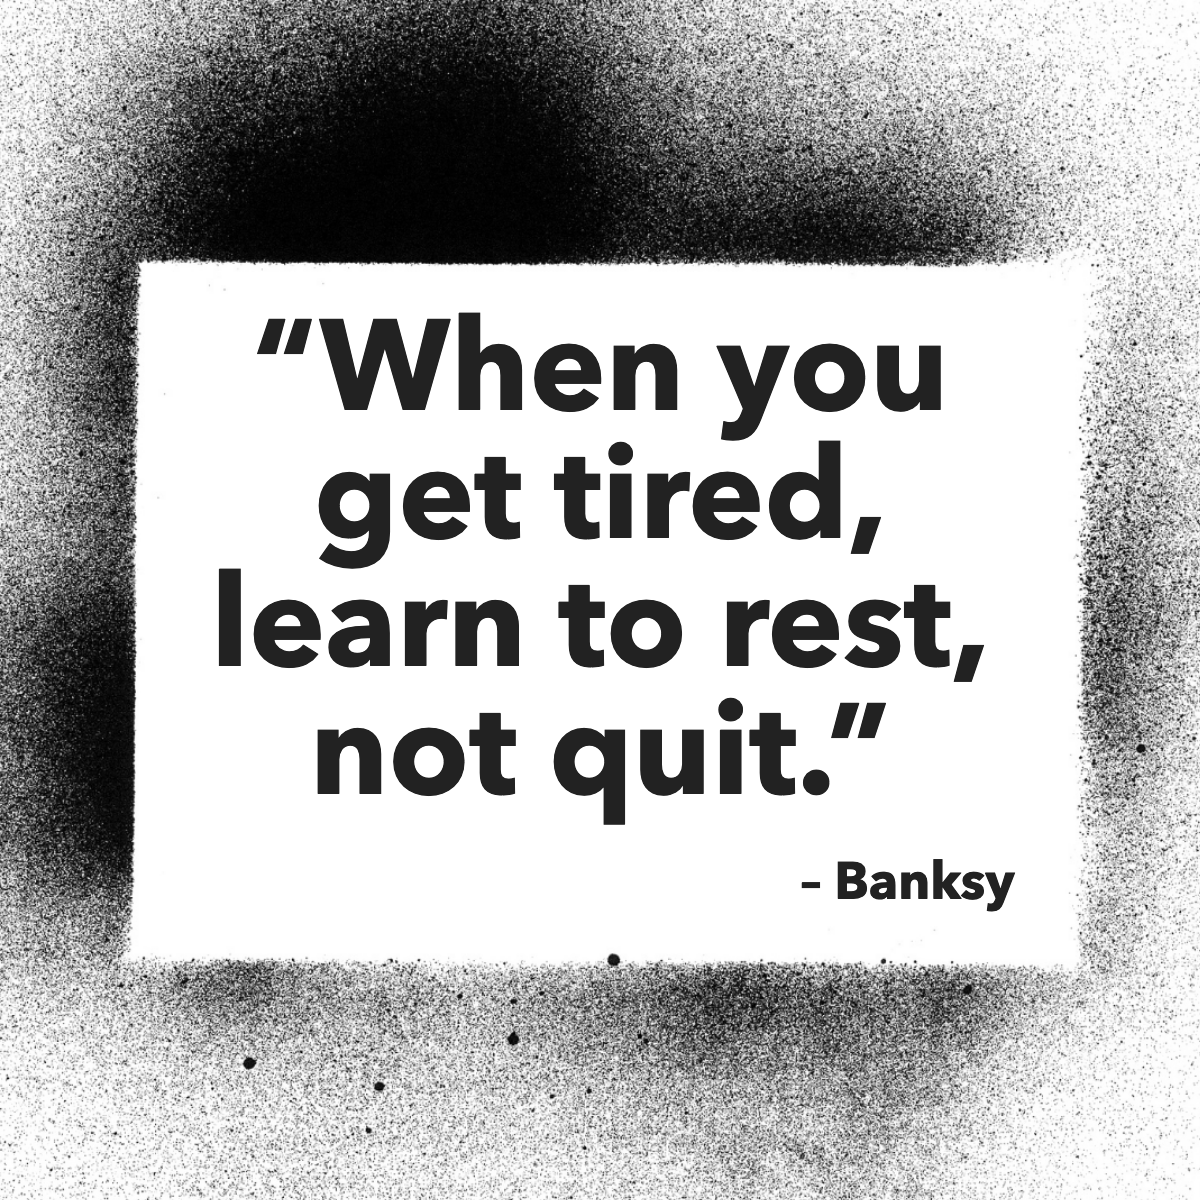 Don't feel guilty if you ever get tired, take your time ... 😉

#motivationnation #motivationalquotesdaily #quoteoftheday #quoteofday #quotedaily

 #mkehomes #mkeliving #withyouonyourjourneyhome